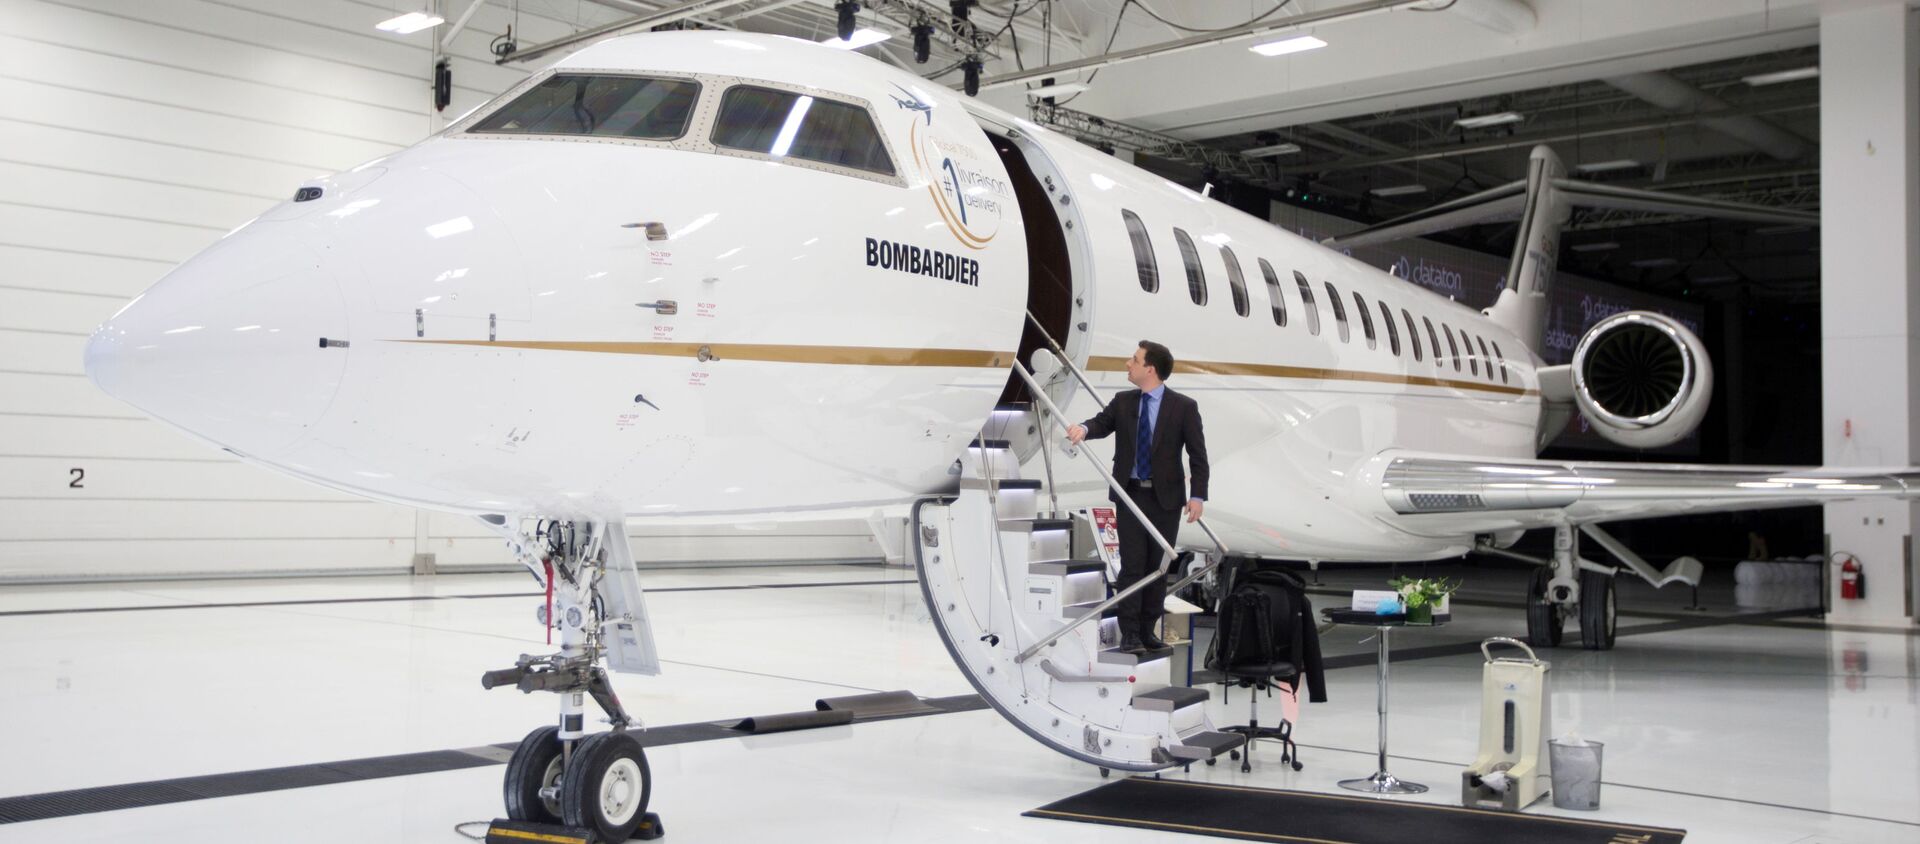 Bombardier's Global 7500 business jet to have a queen-sized bed and hot shower, is shown during a media tour in Montreal - Sputnik International, 1920, 07.07.2021